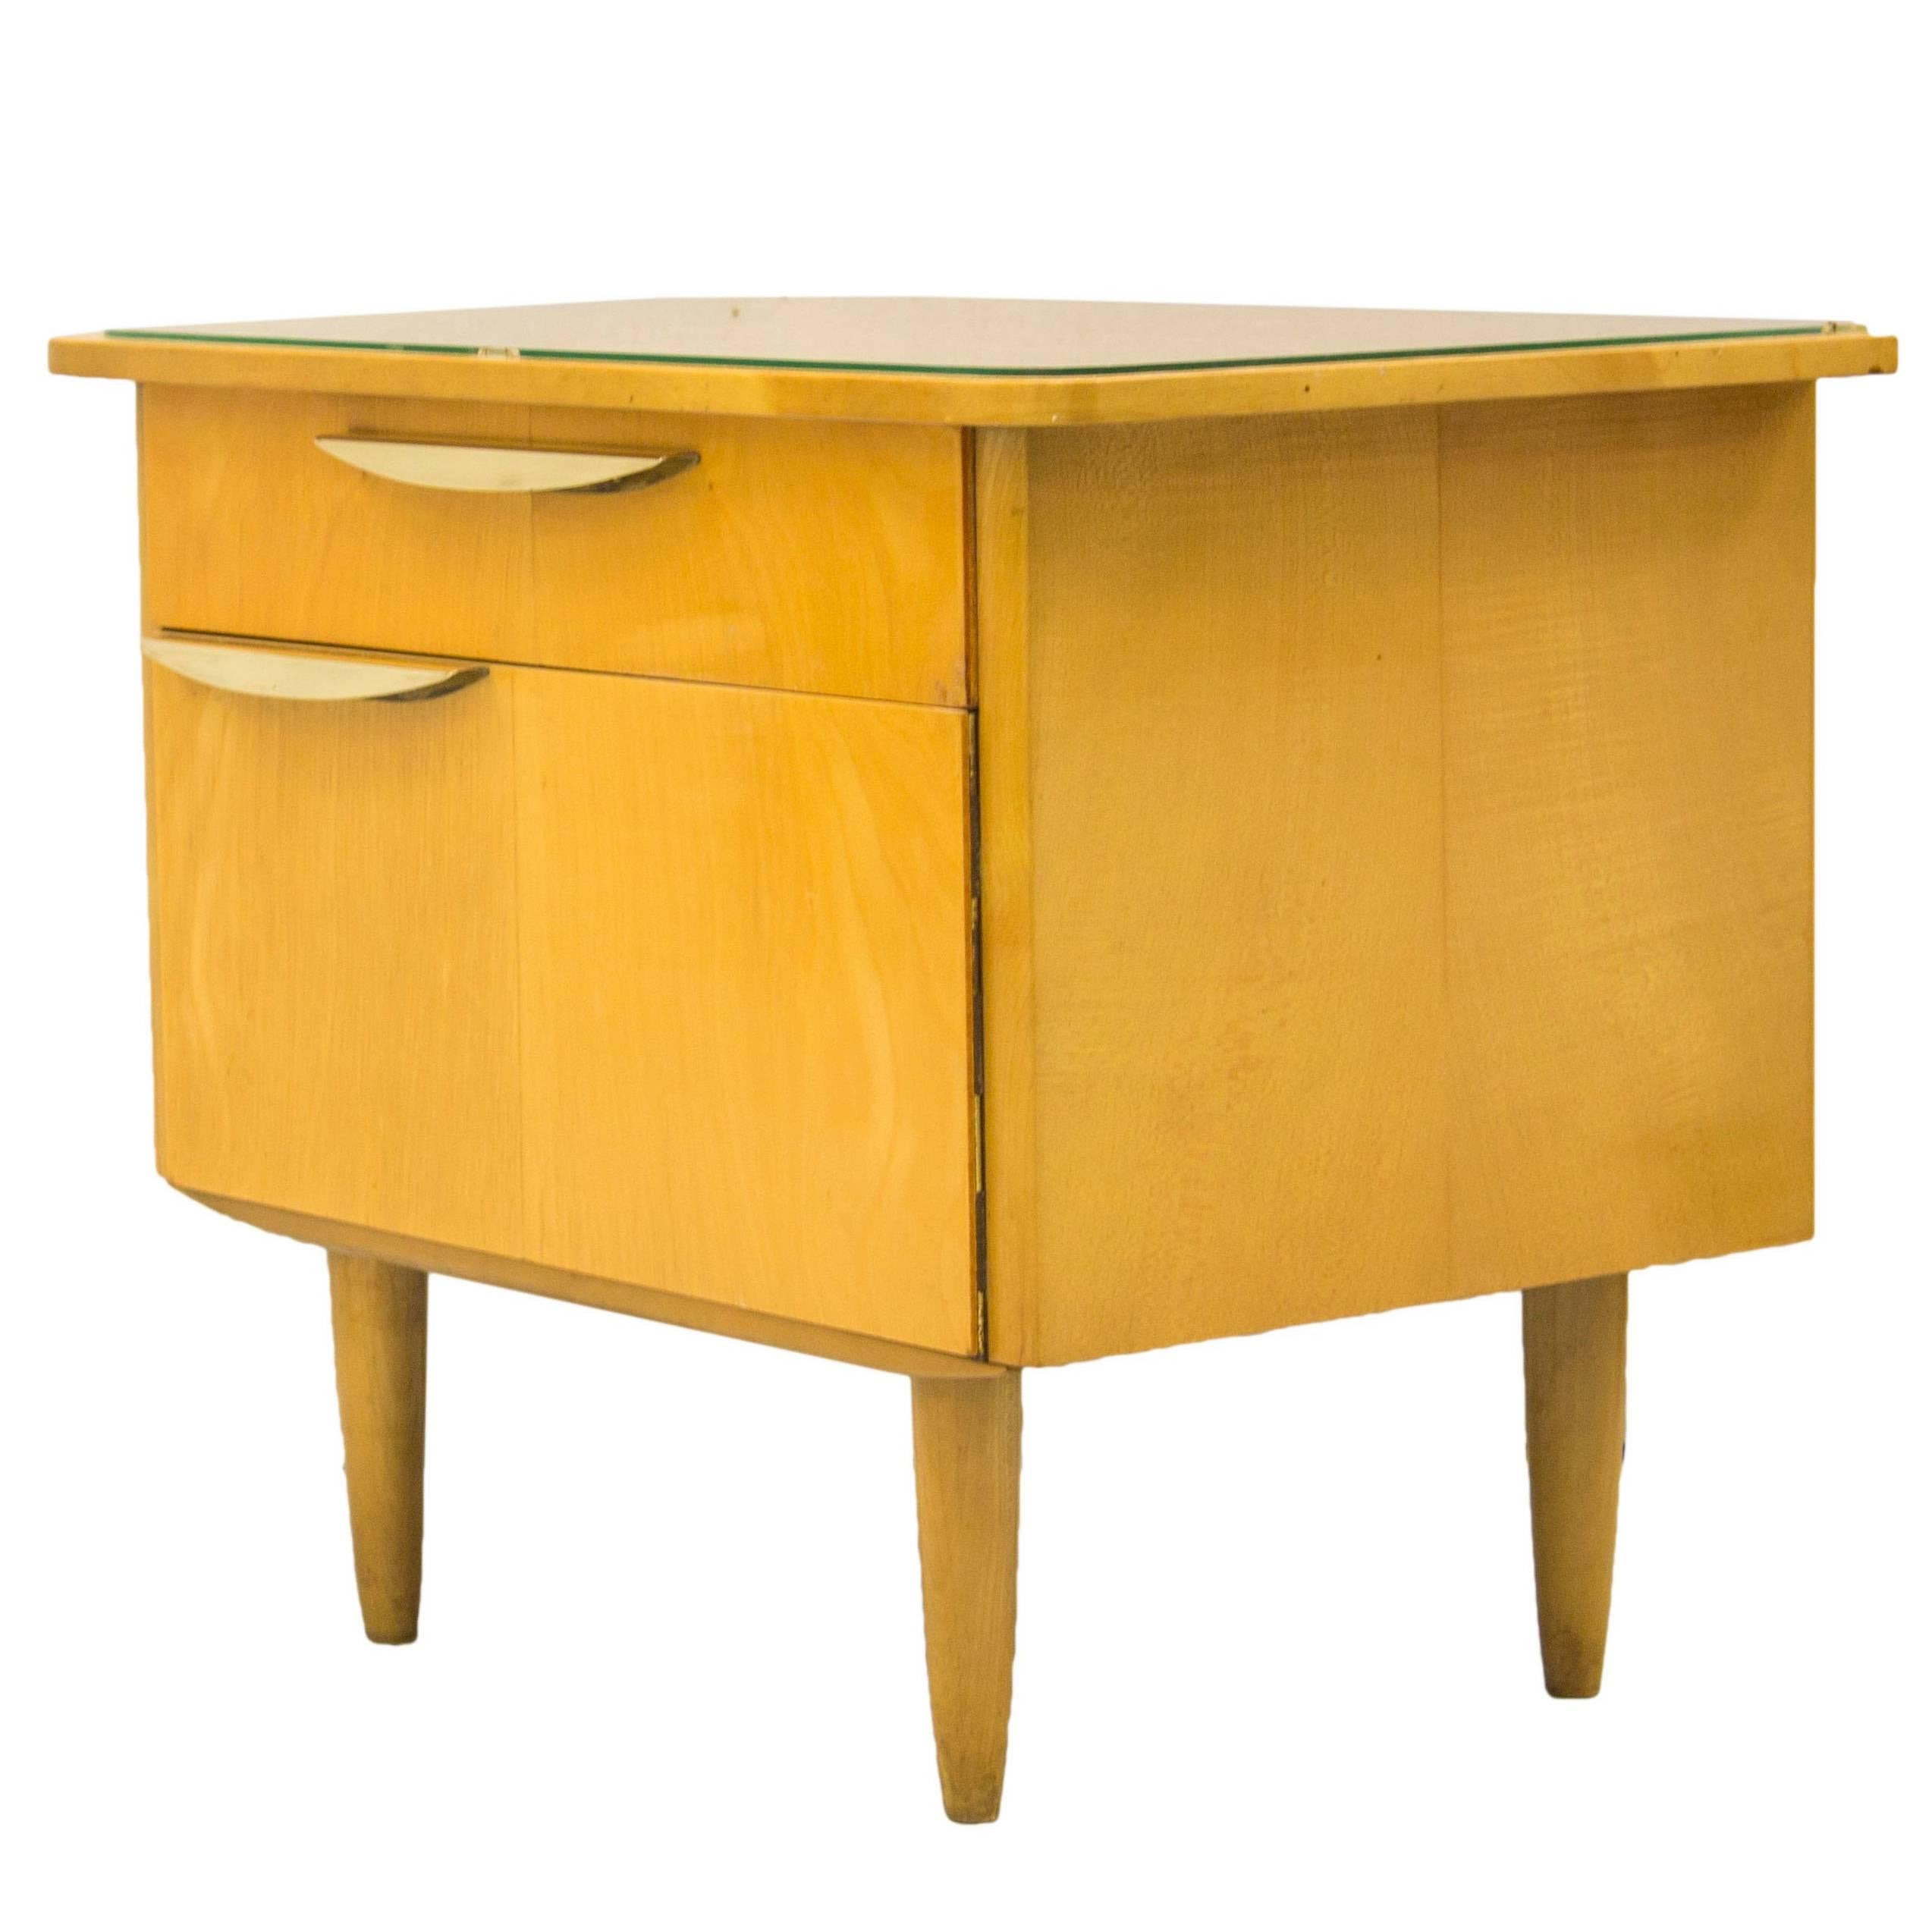 Pair of Italian Mid-Century Sycamore Bedside Tables Gloss